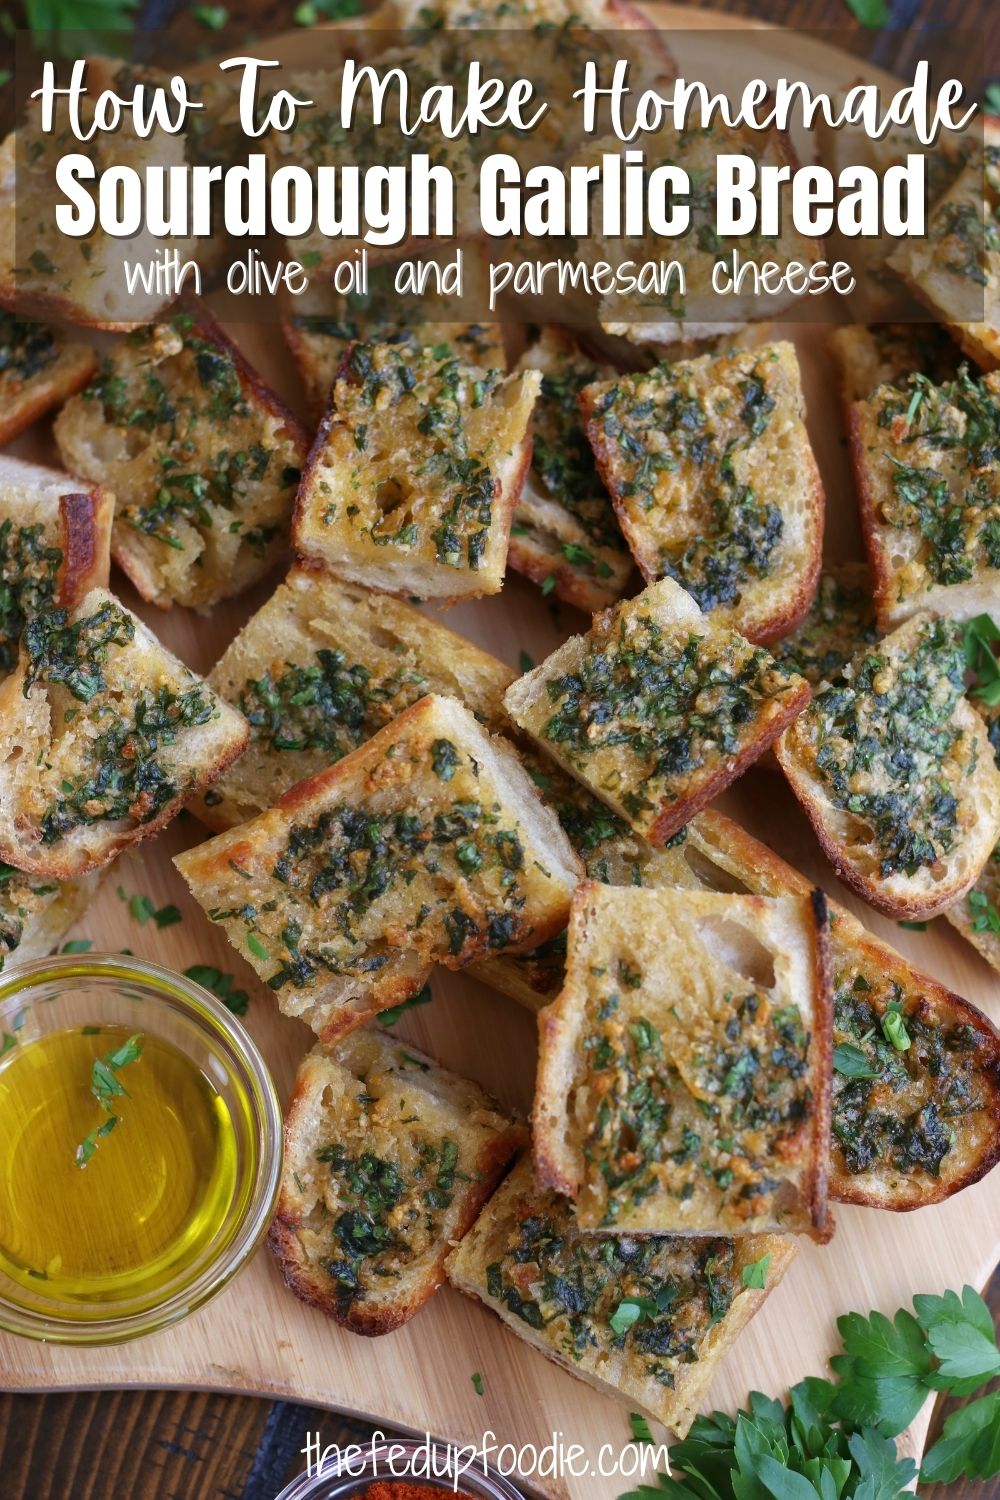 So easy to make and full of flavor, Sourdough Garlic Bread takes just minutes to make. This crusty and mouthwatering side dish goes perfectly with Kabobs, Pork Chops, Wings and of course Pasta. Always a family favorite.
#SourdoughGarlicBread #HomemadeGarlicBreadFromScratch #EasyHomemadeGarlicBread #BestGarlicBreadRecipe #HomemadeGarlicParmesanBread 